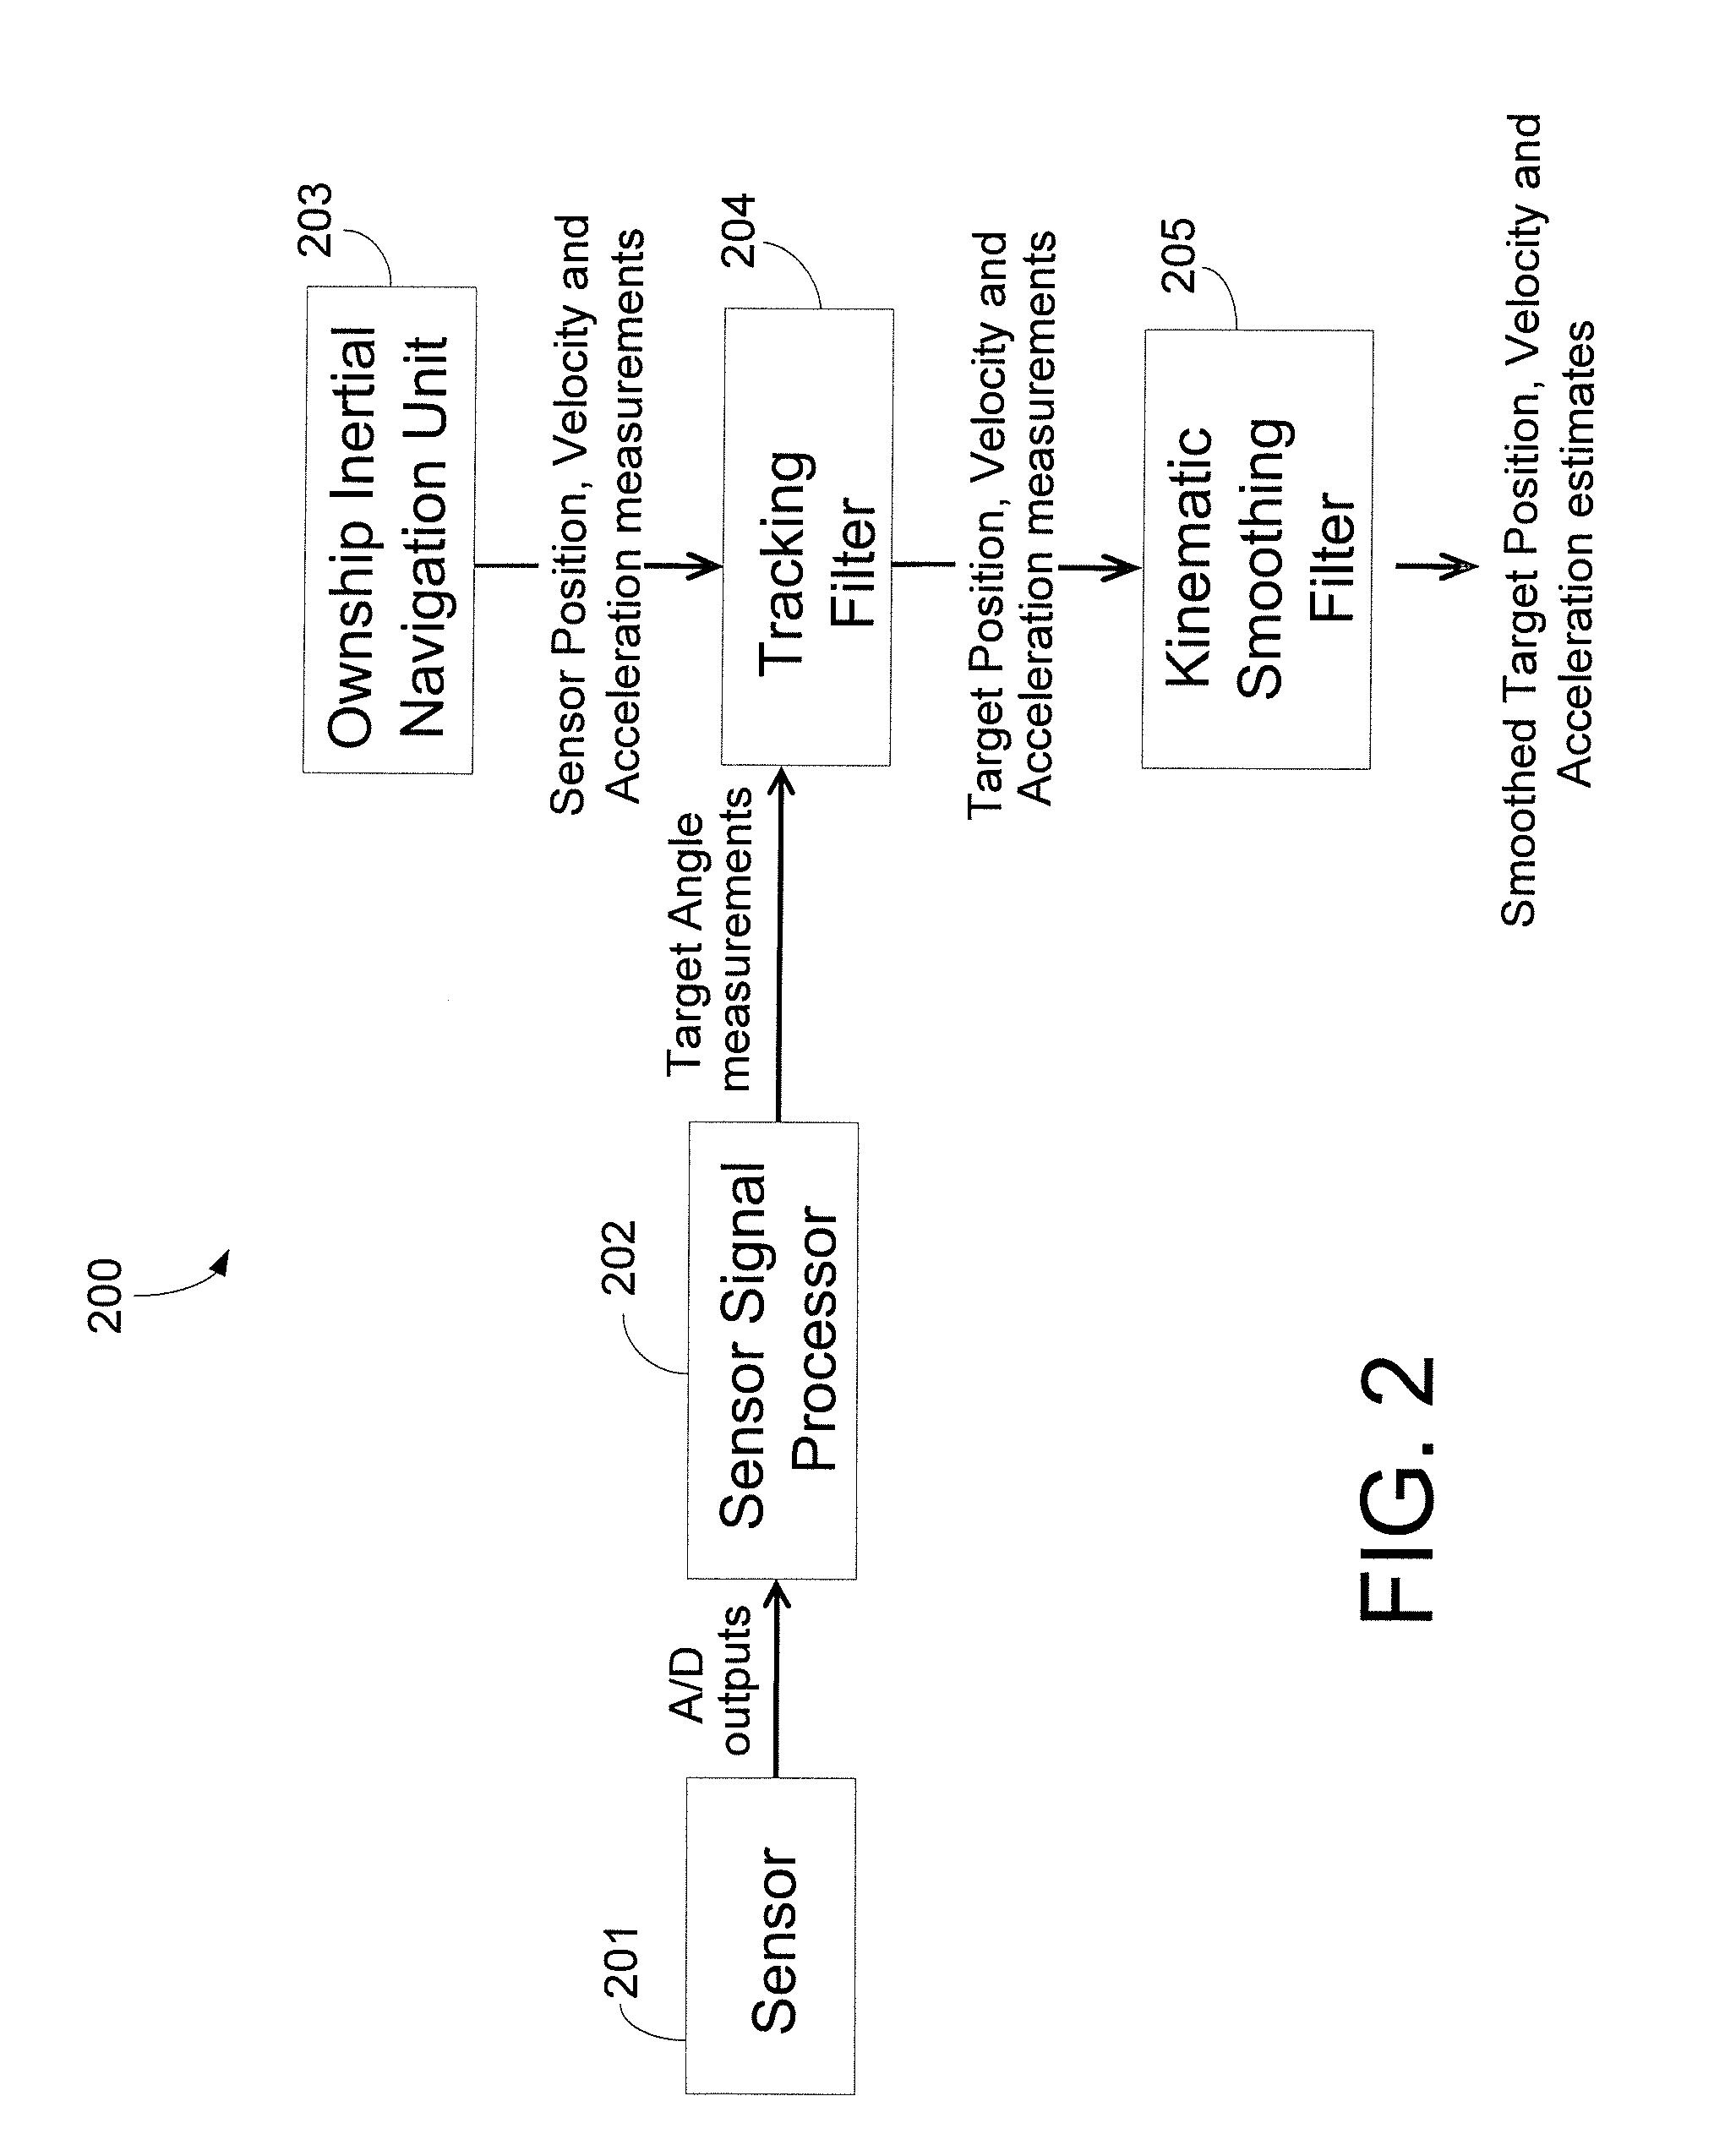 System, method, and filter for target tracking in cartesian space